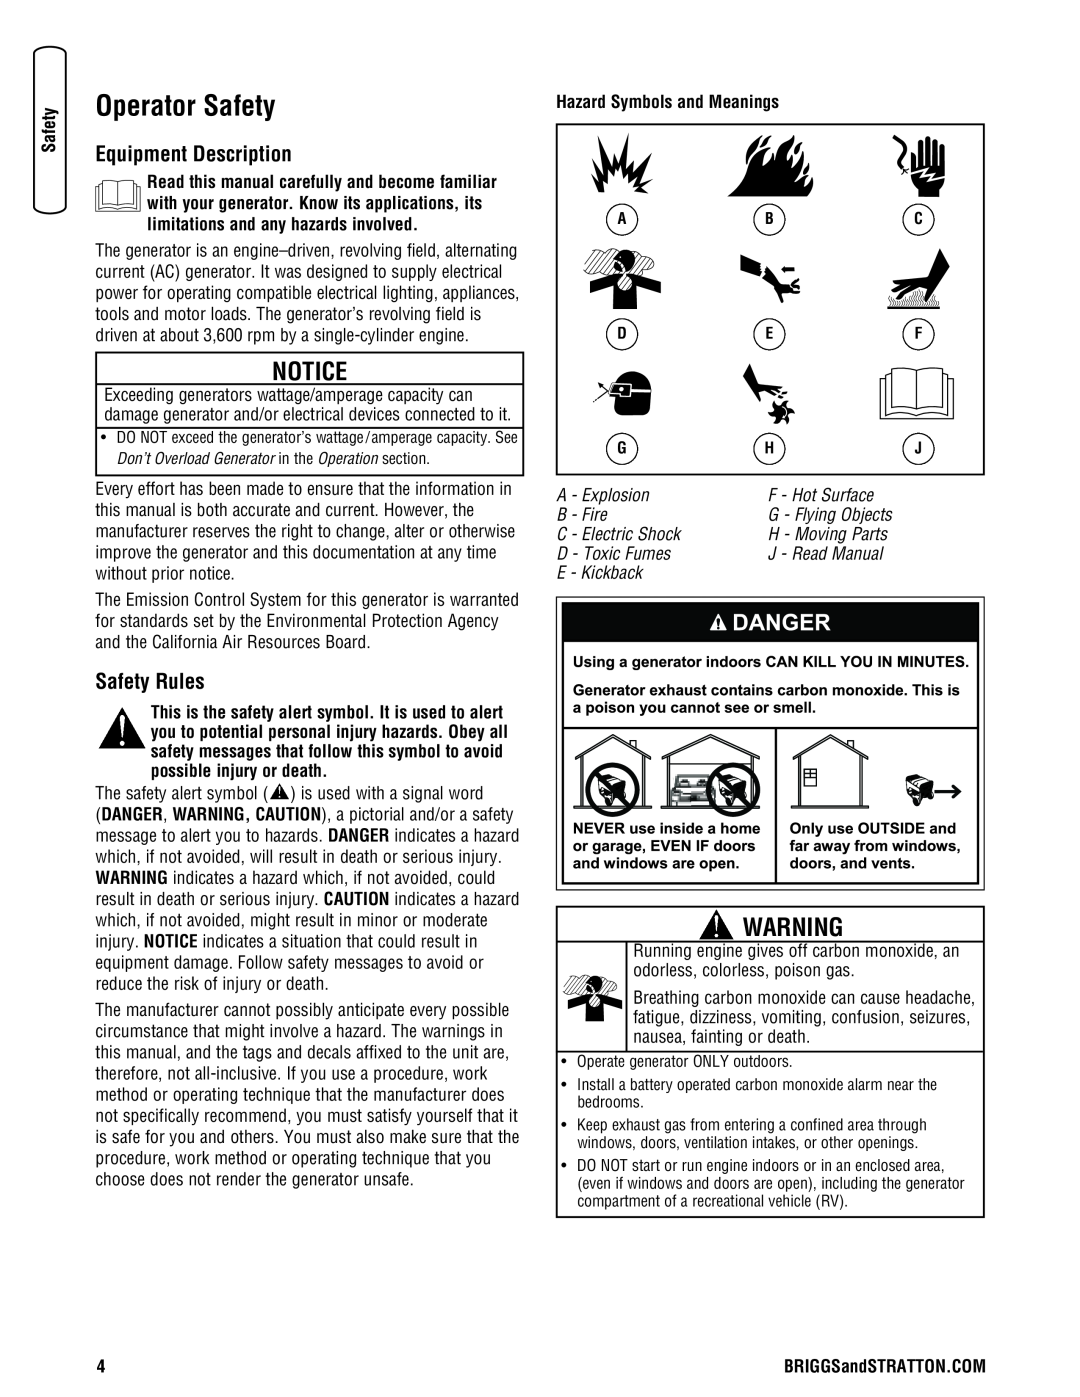 Briggs & Stratton 206405GS Operator Safety, Equipment Description, Safety Rules, Hazard Symbols and Meanings, B - Fire 